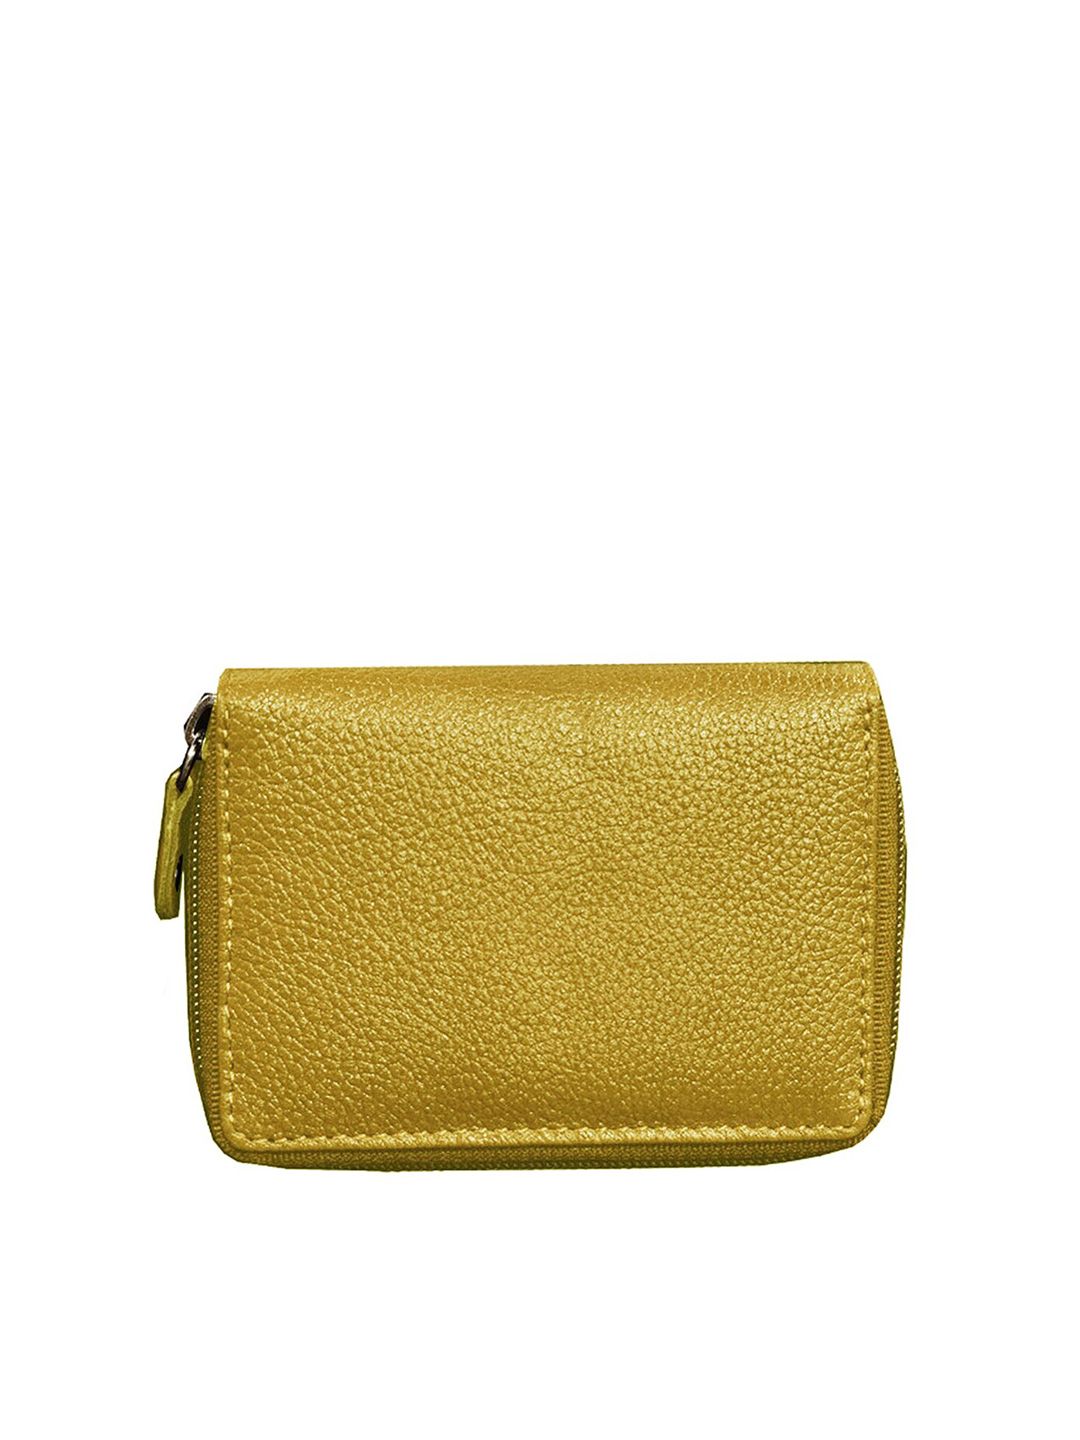 ABYS Women Yellow Textured Genuine Leather Zip Around Wallet Price in India